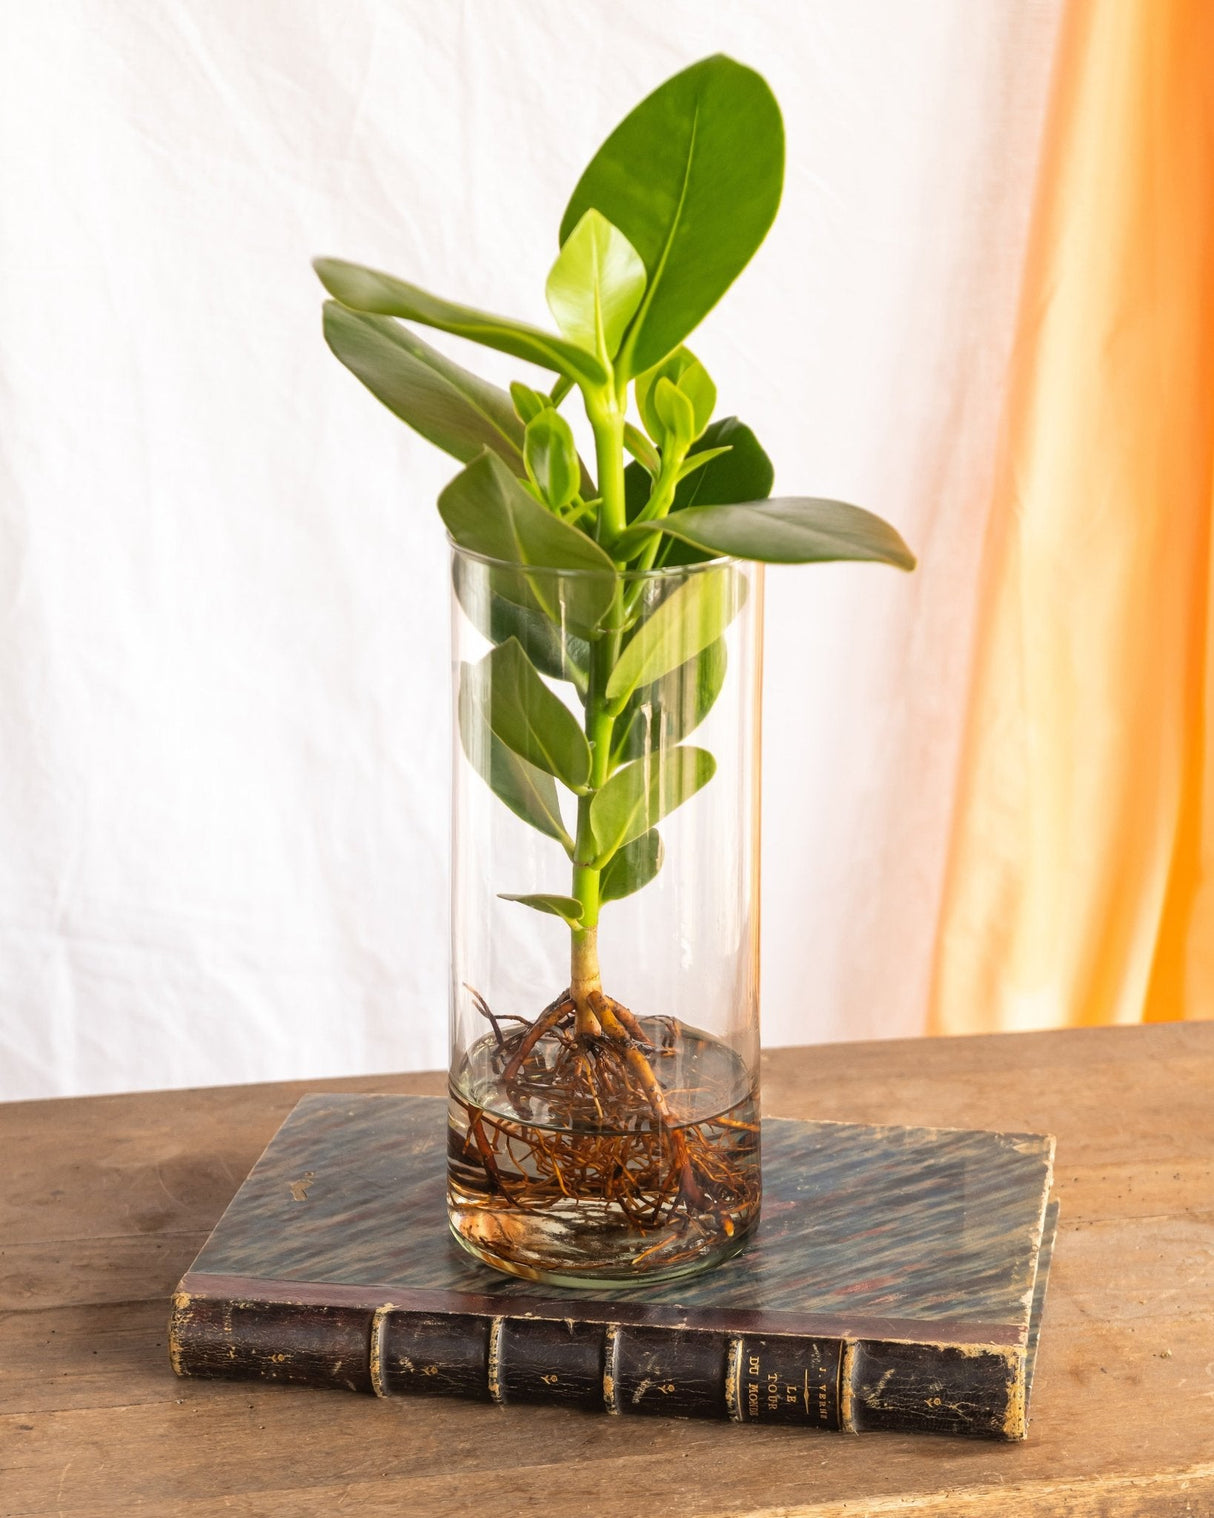 Grand Clusia in hydroculture and its glass vase